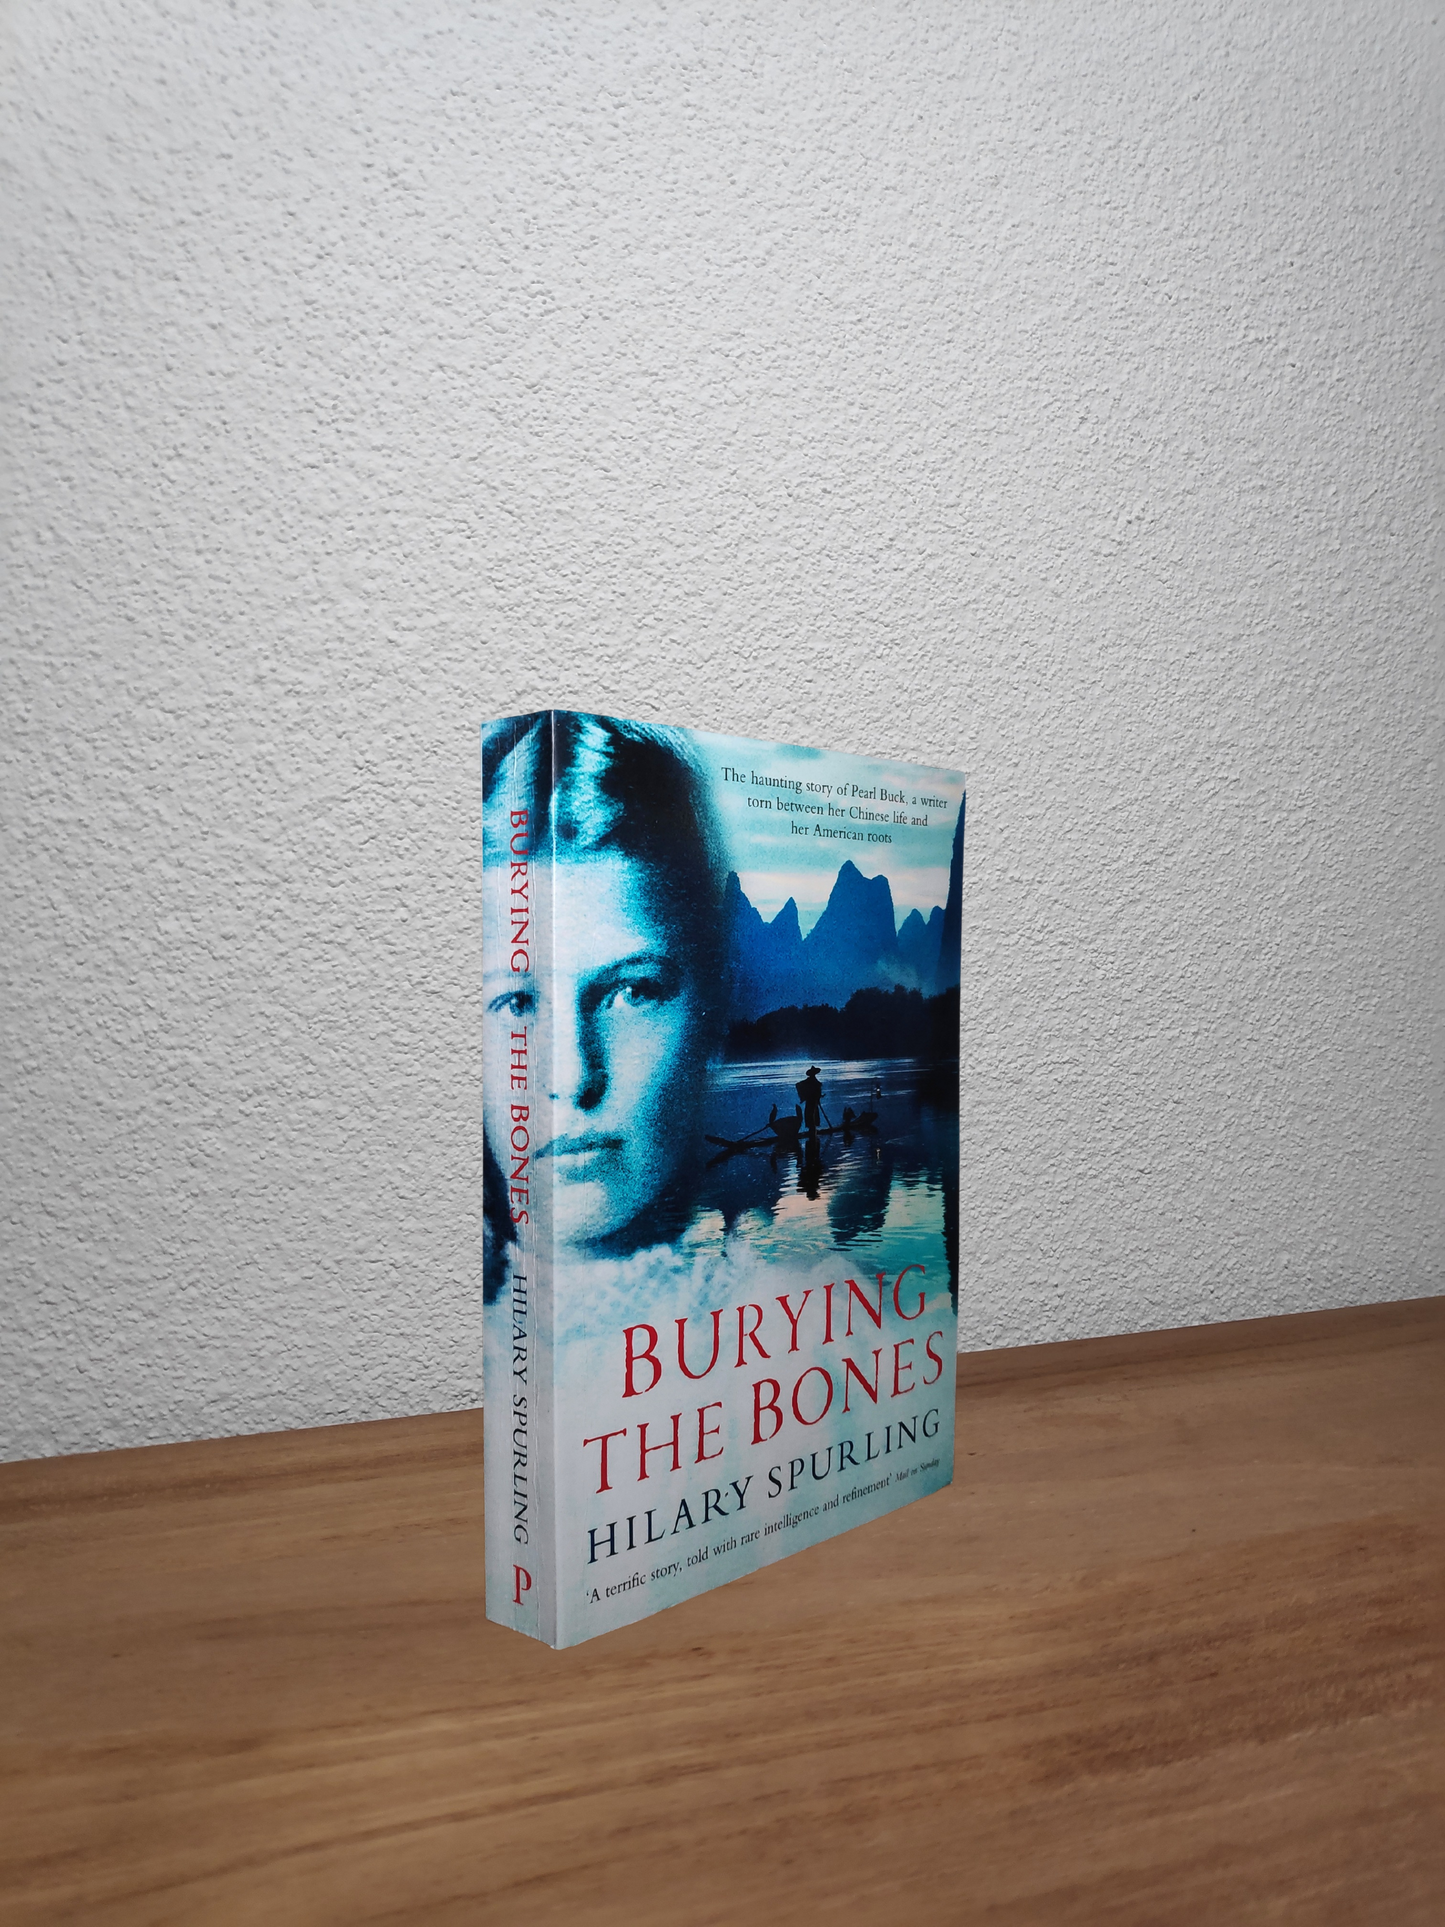 Hilary Spurling - Burying the Bones  - Second-hand english book to deliver in Zurich & Switzerland